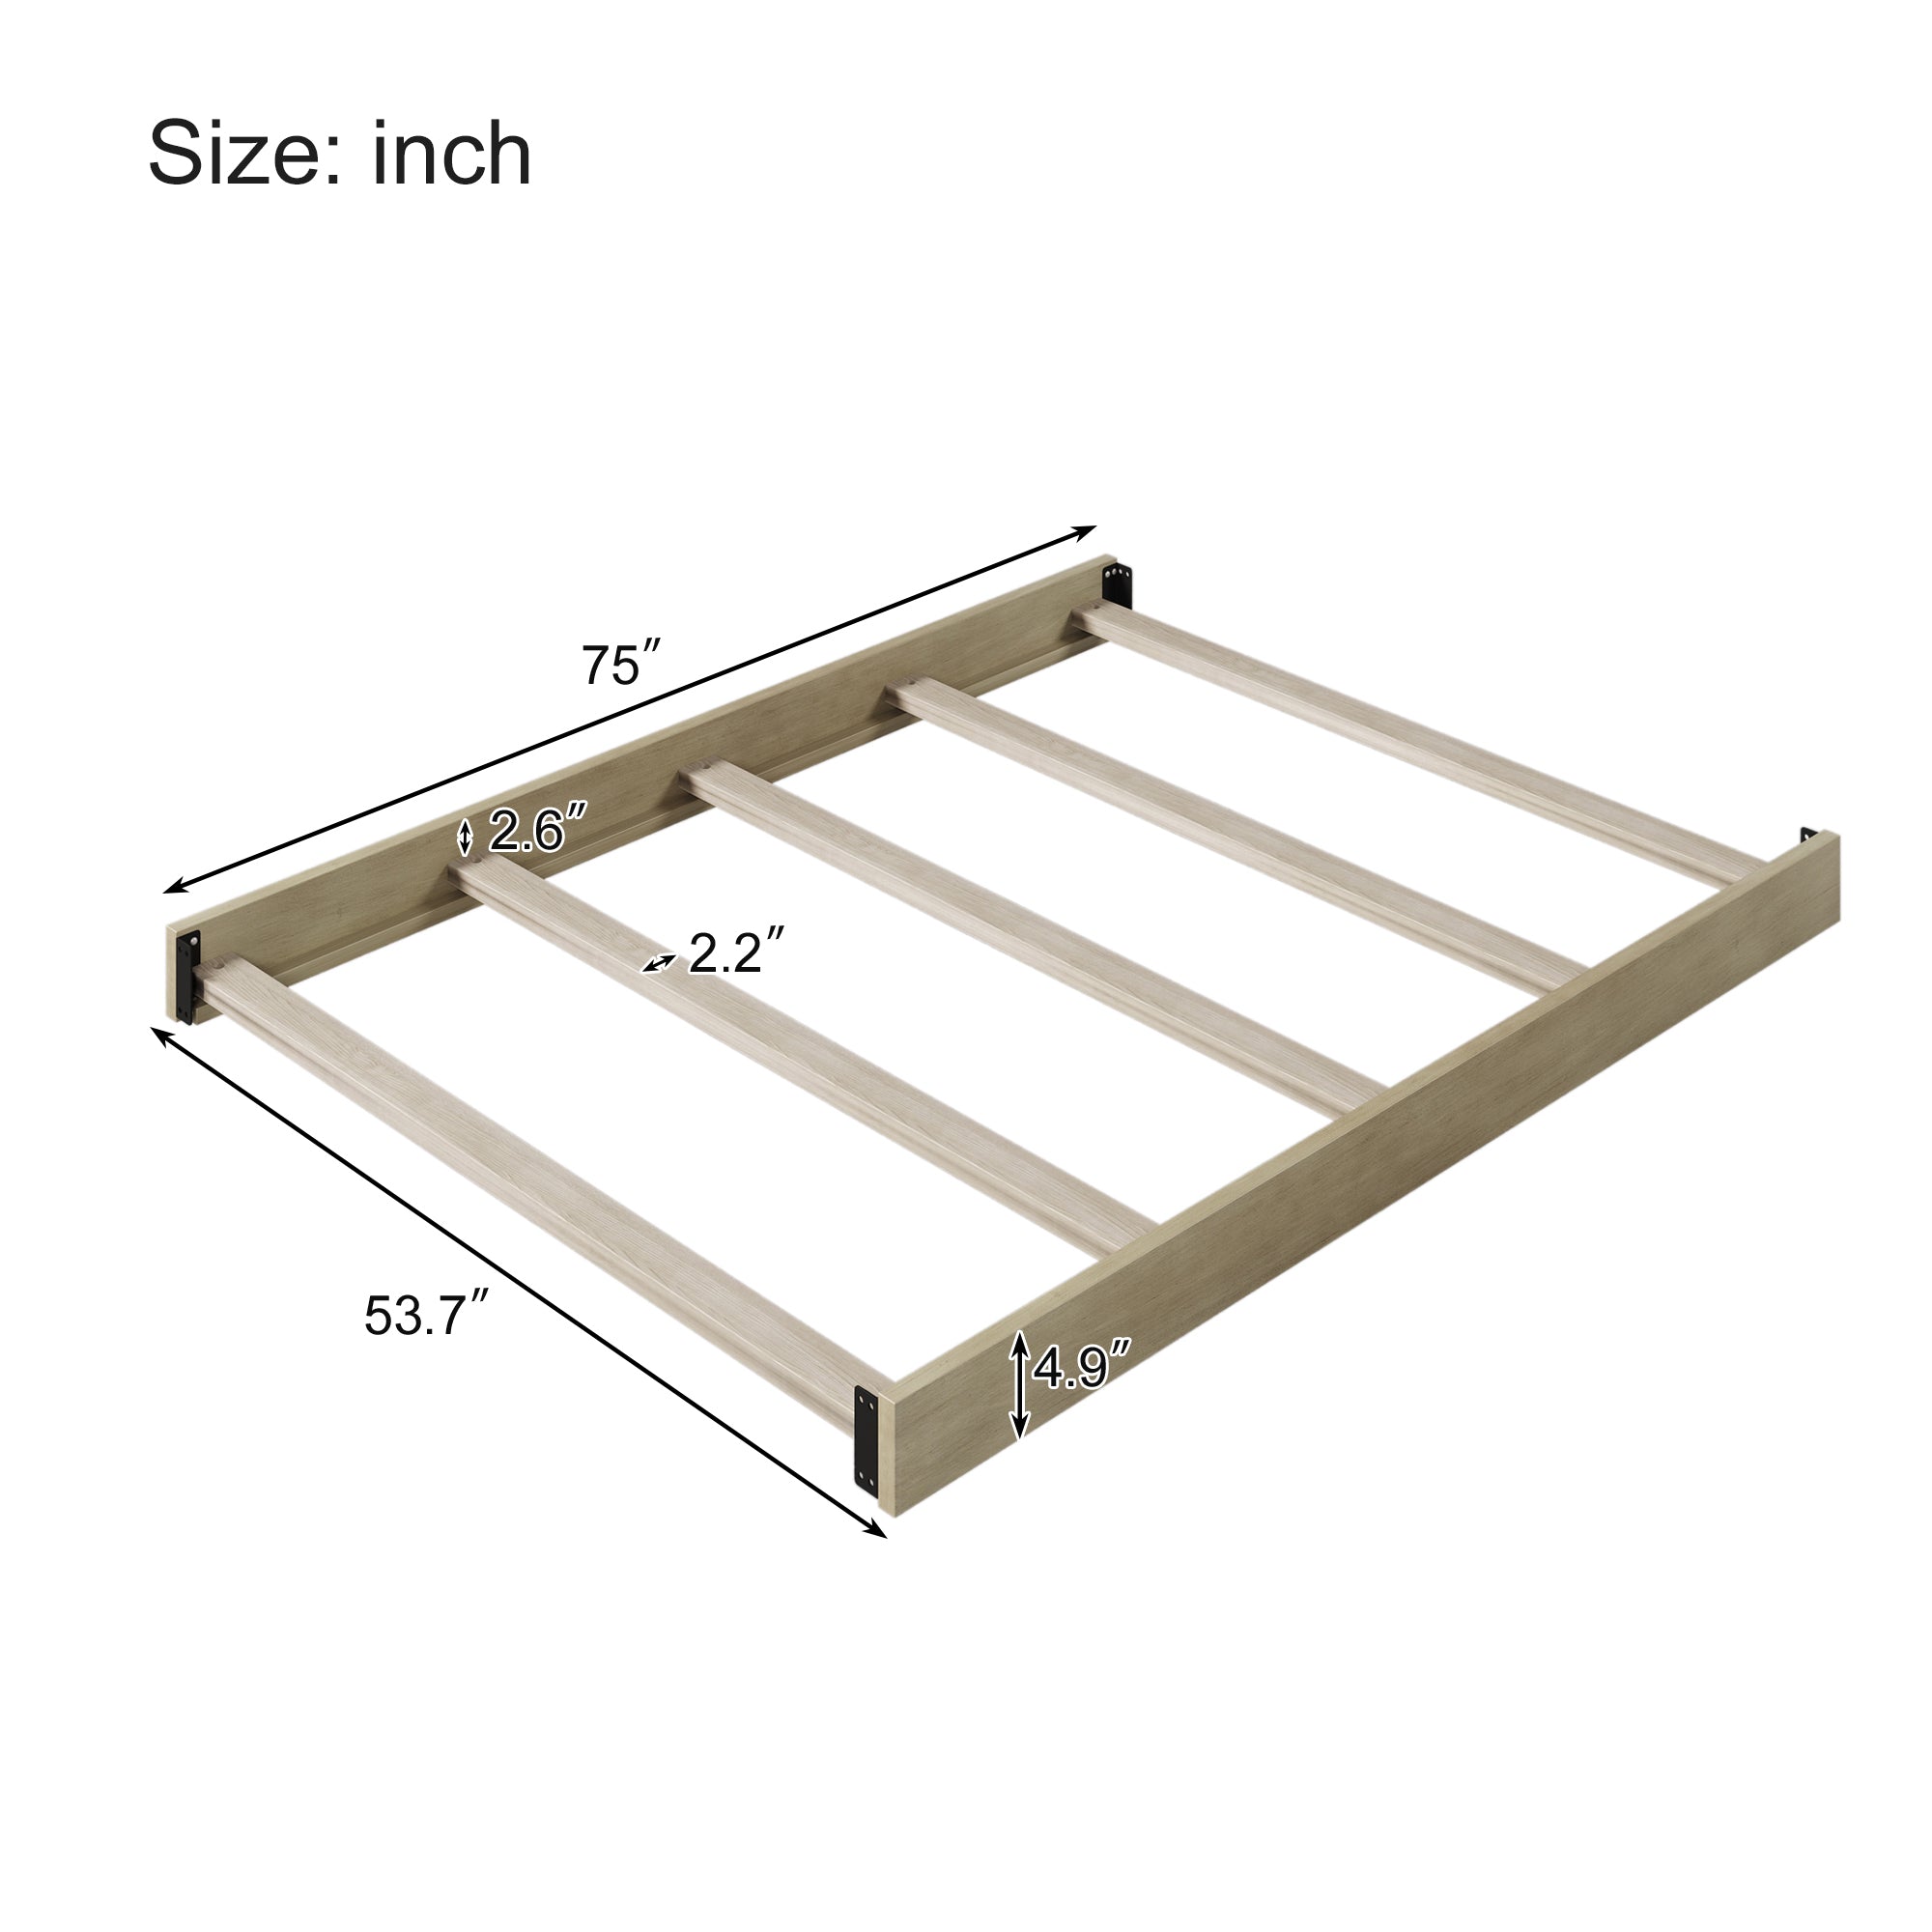 Full Size Conversion Kit Bed Rails for Convertible stone gray-solid wood+mdf